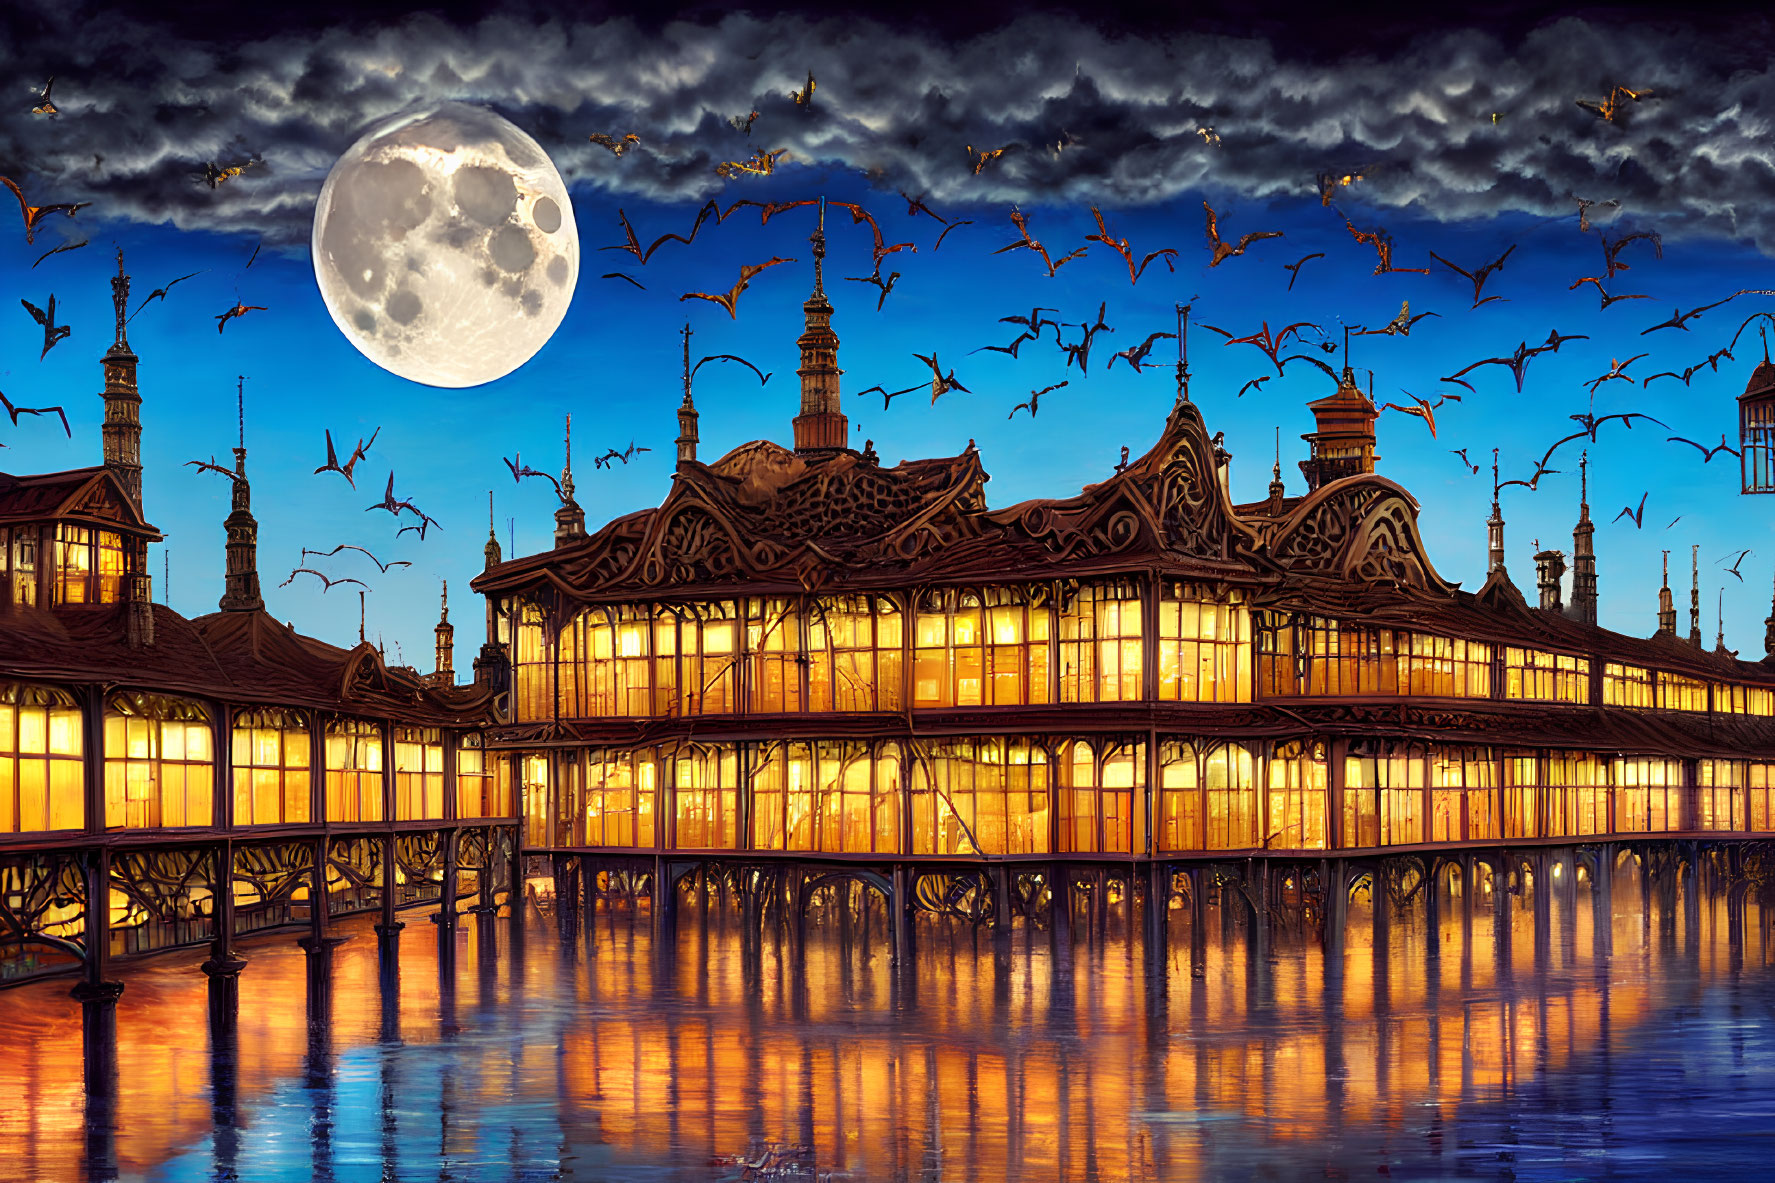 Victorian-style building with ornate details, illuminated at night under a full moon, reflected on tranquil